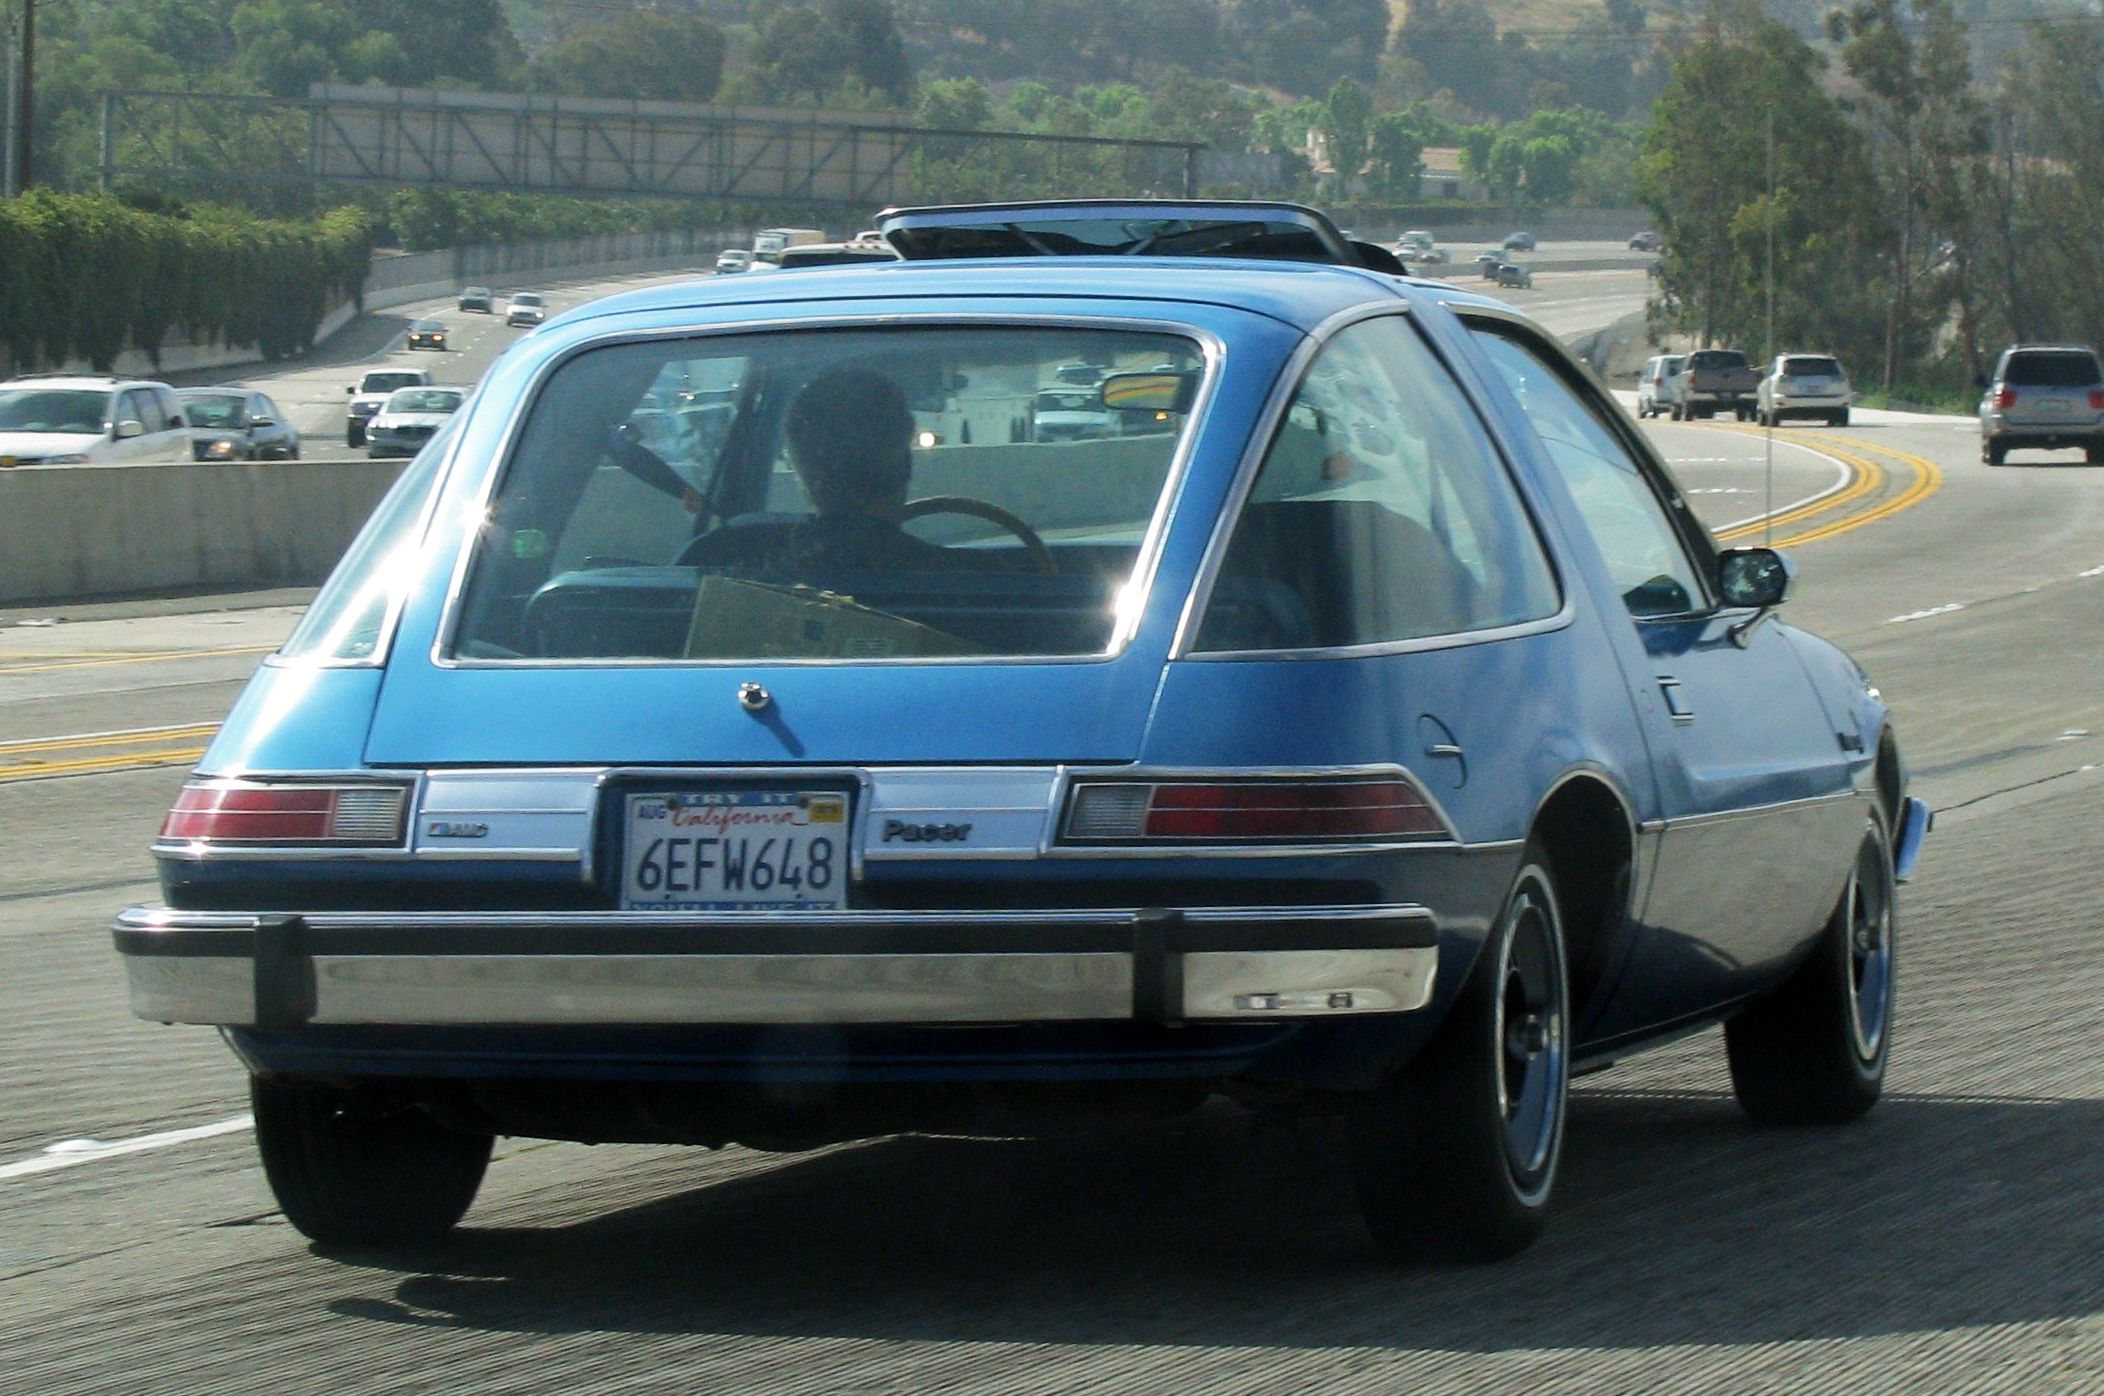 AMC Pacer driving